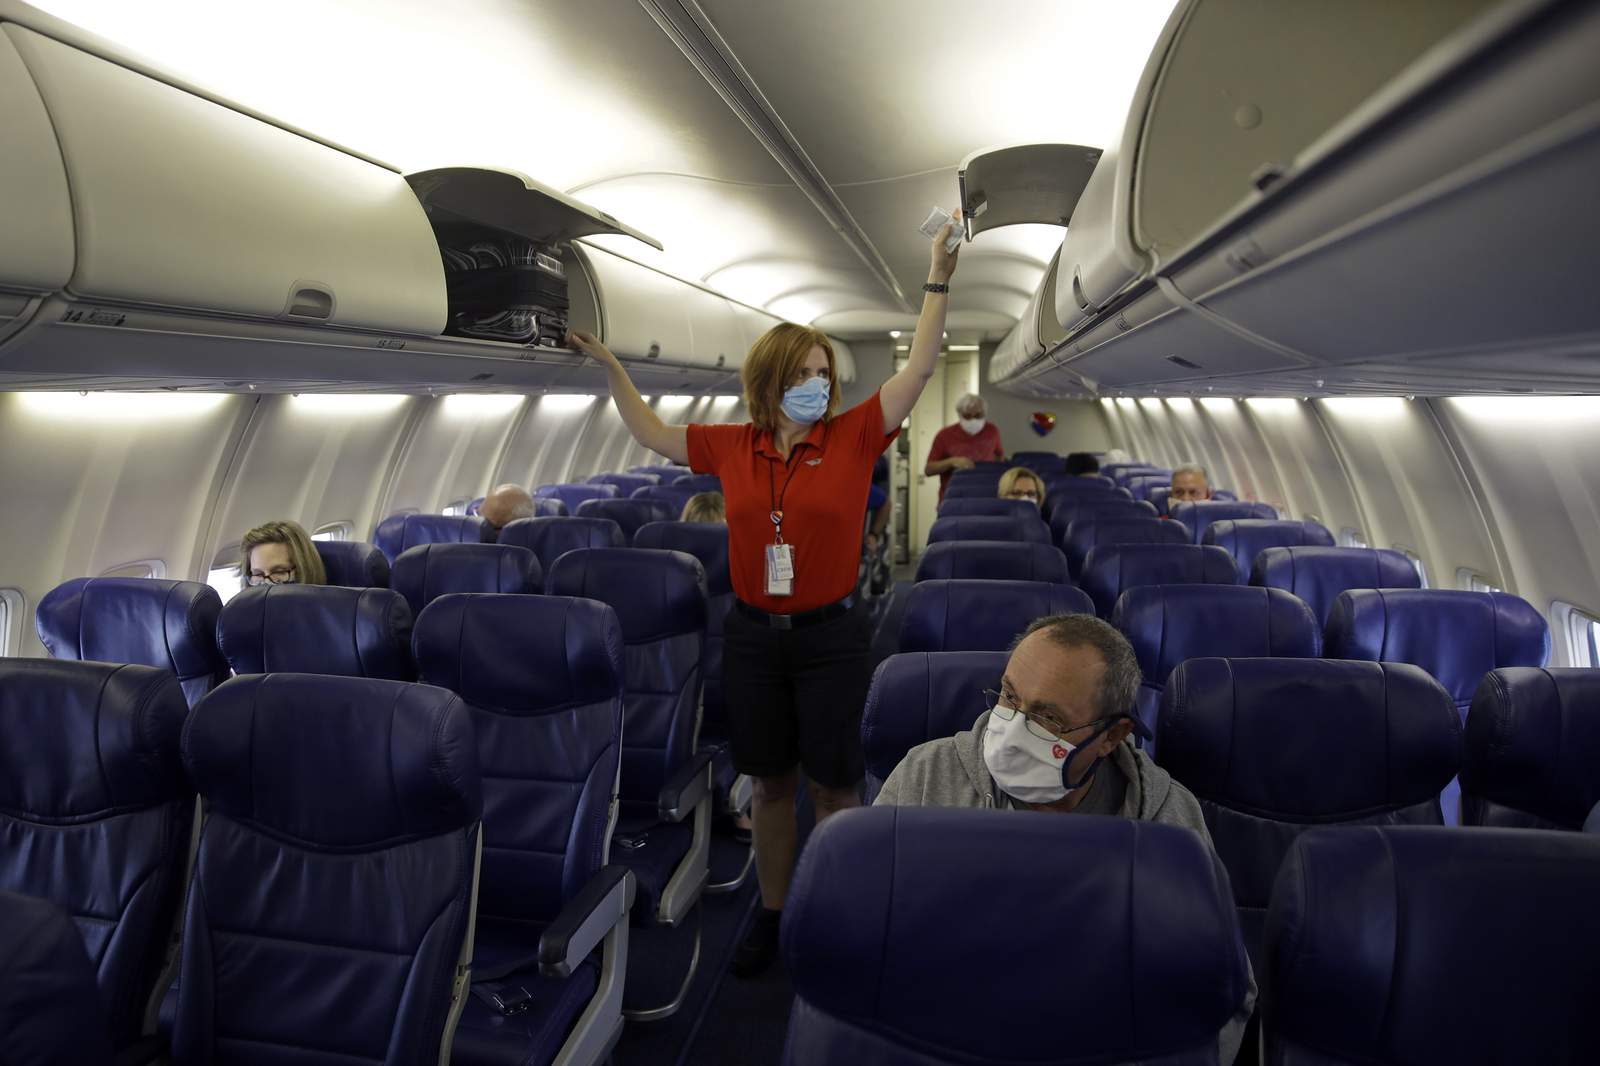 Unfriendly skies: Airline workers brace for mass layoffs